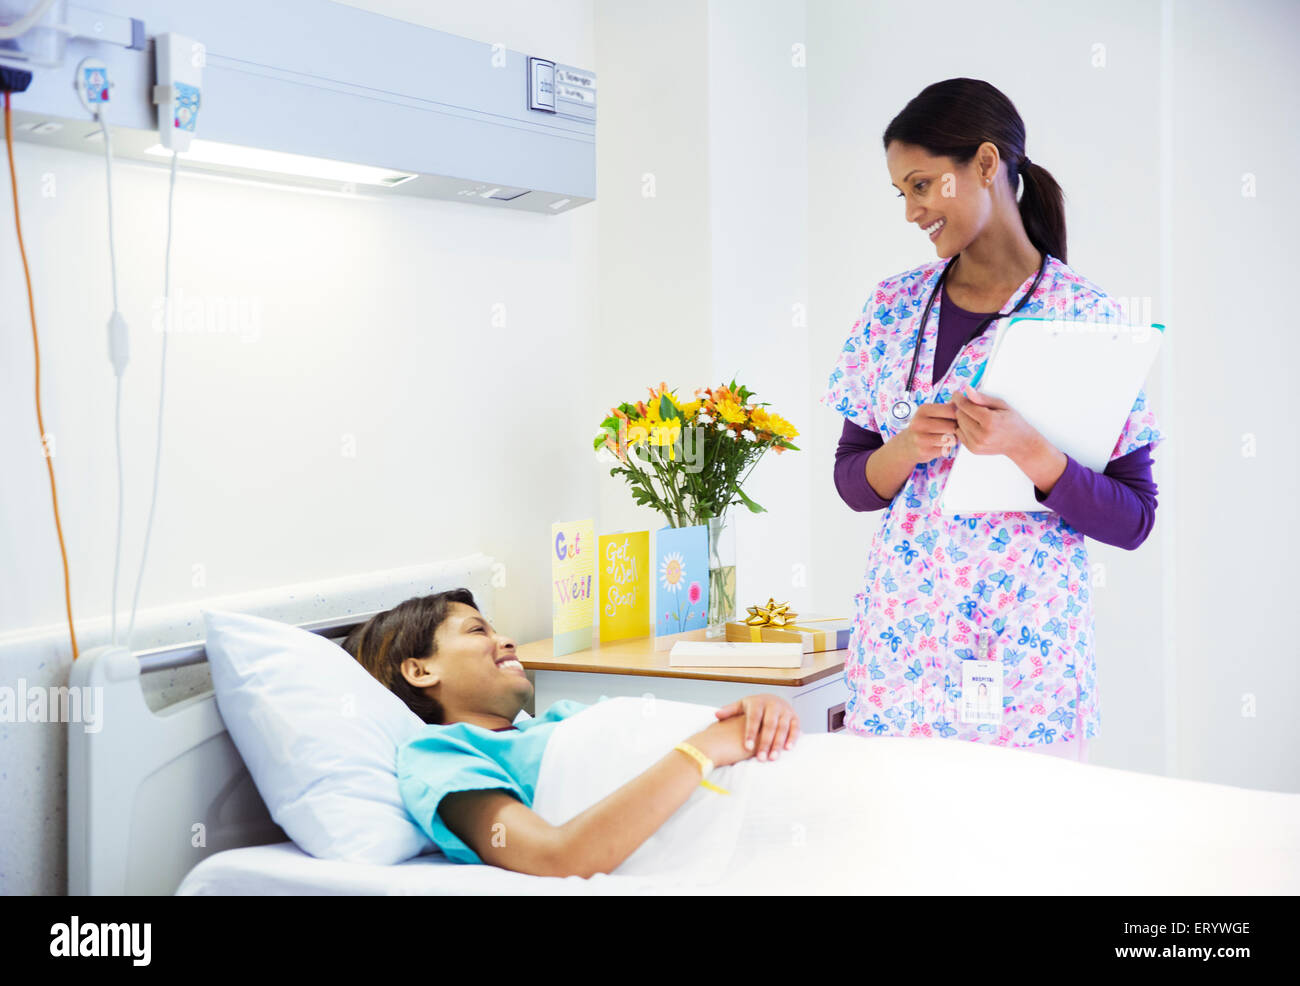 Nurse talking to patient in hospital room Stock Photo